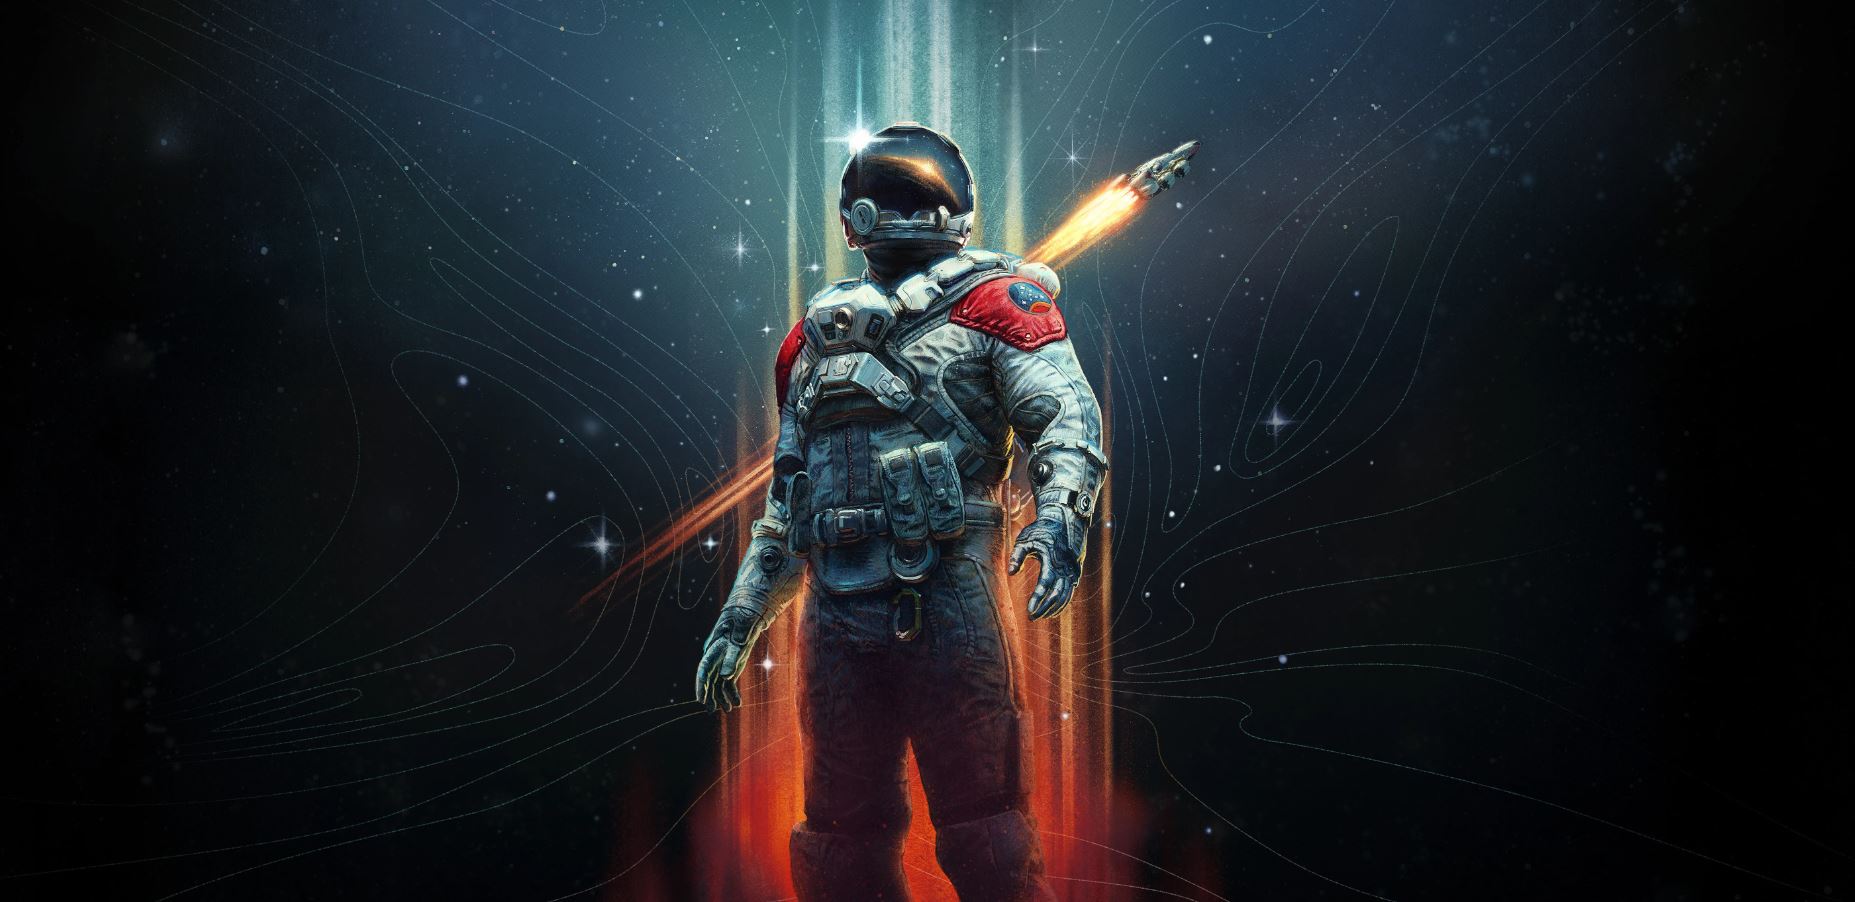 Microsoft stakes Xbox video game sales on long-awaited space adventure  Starfield